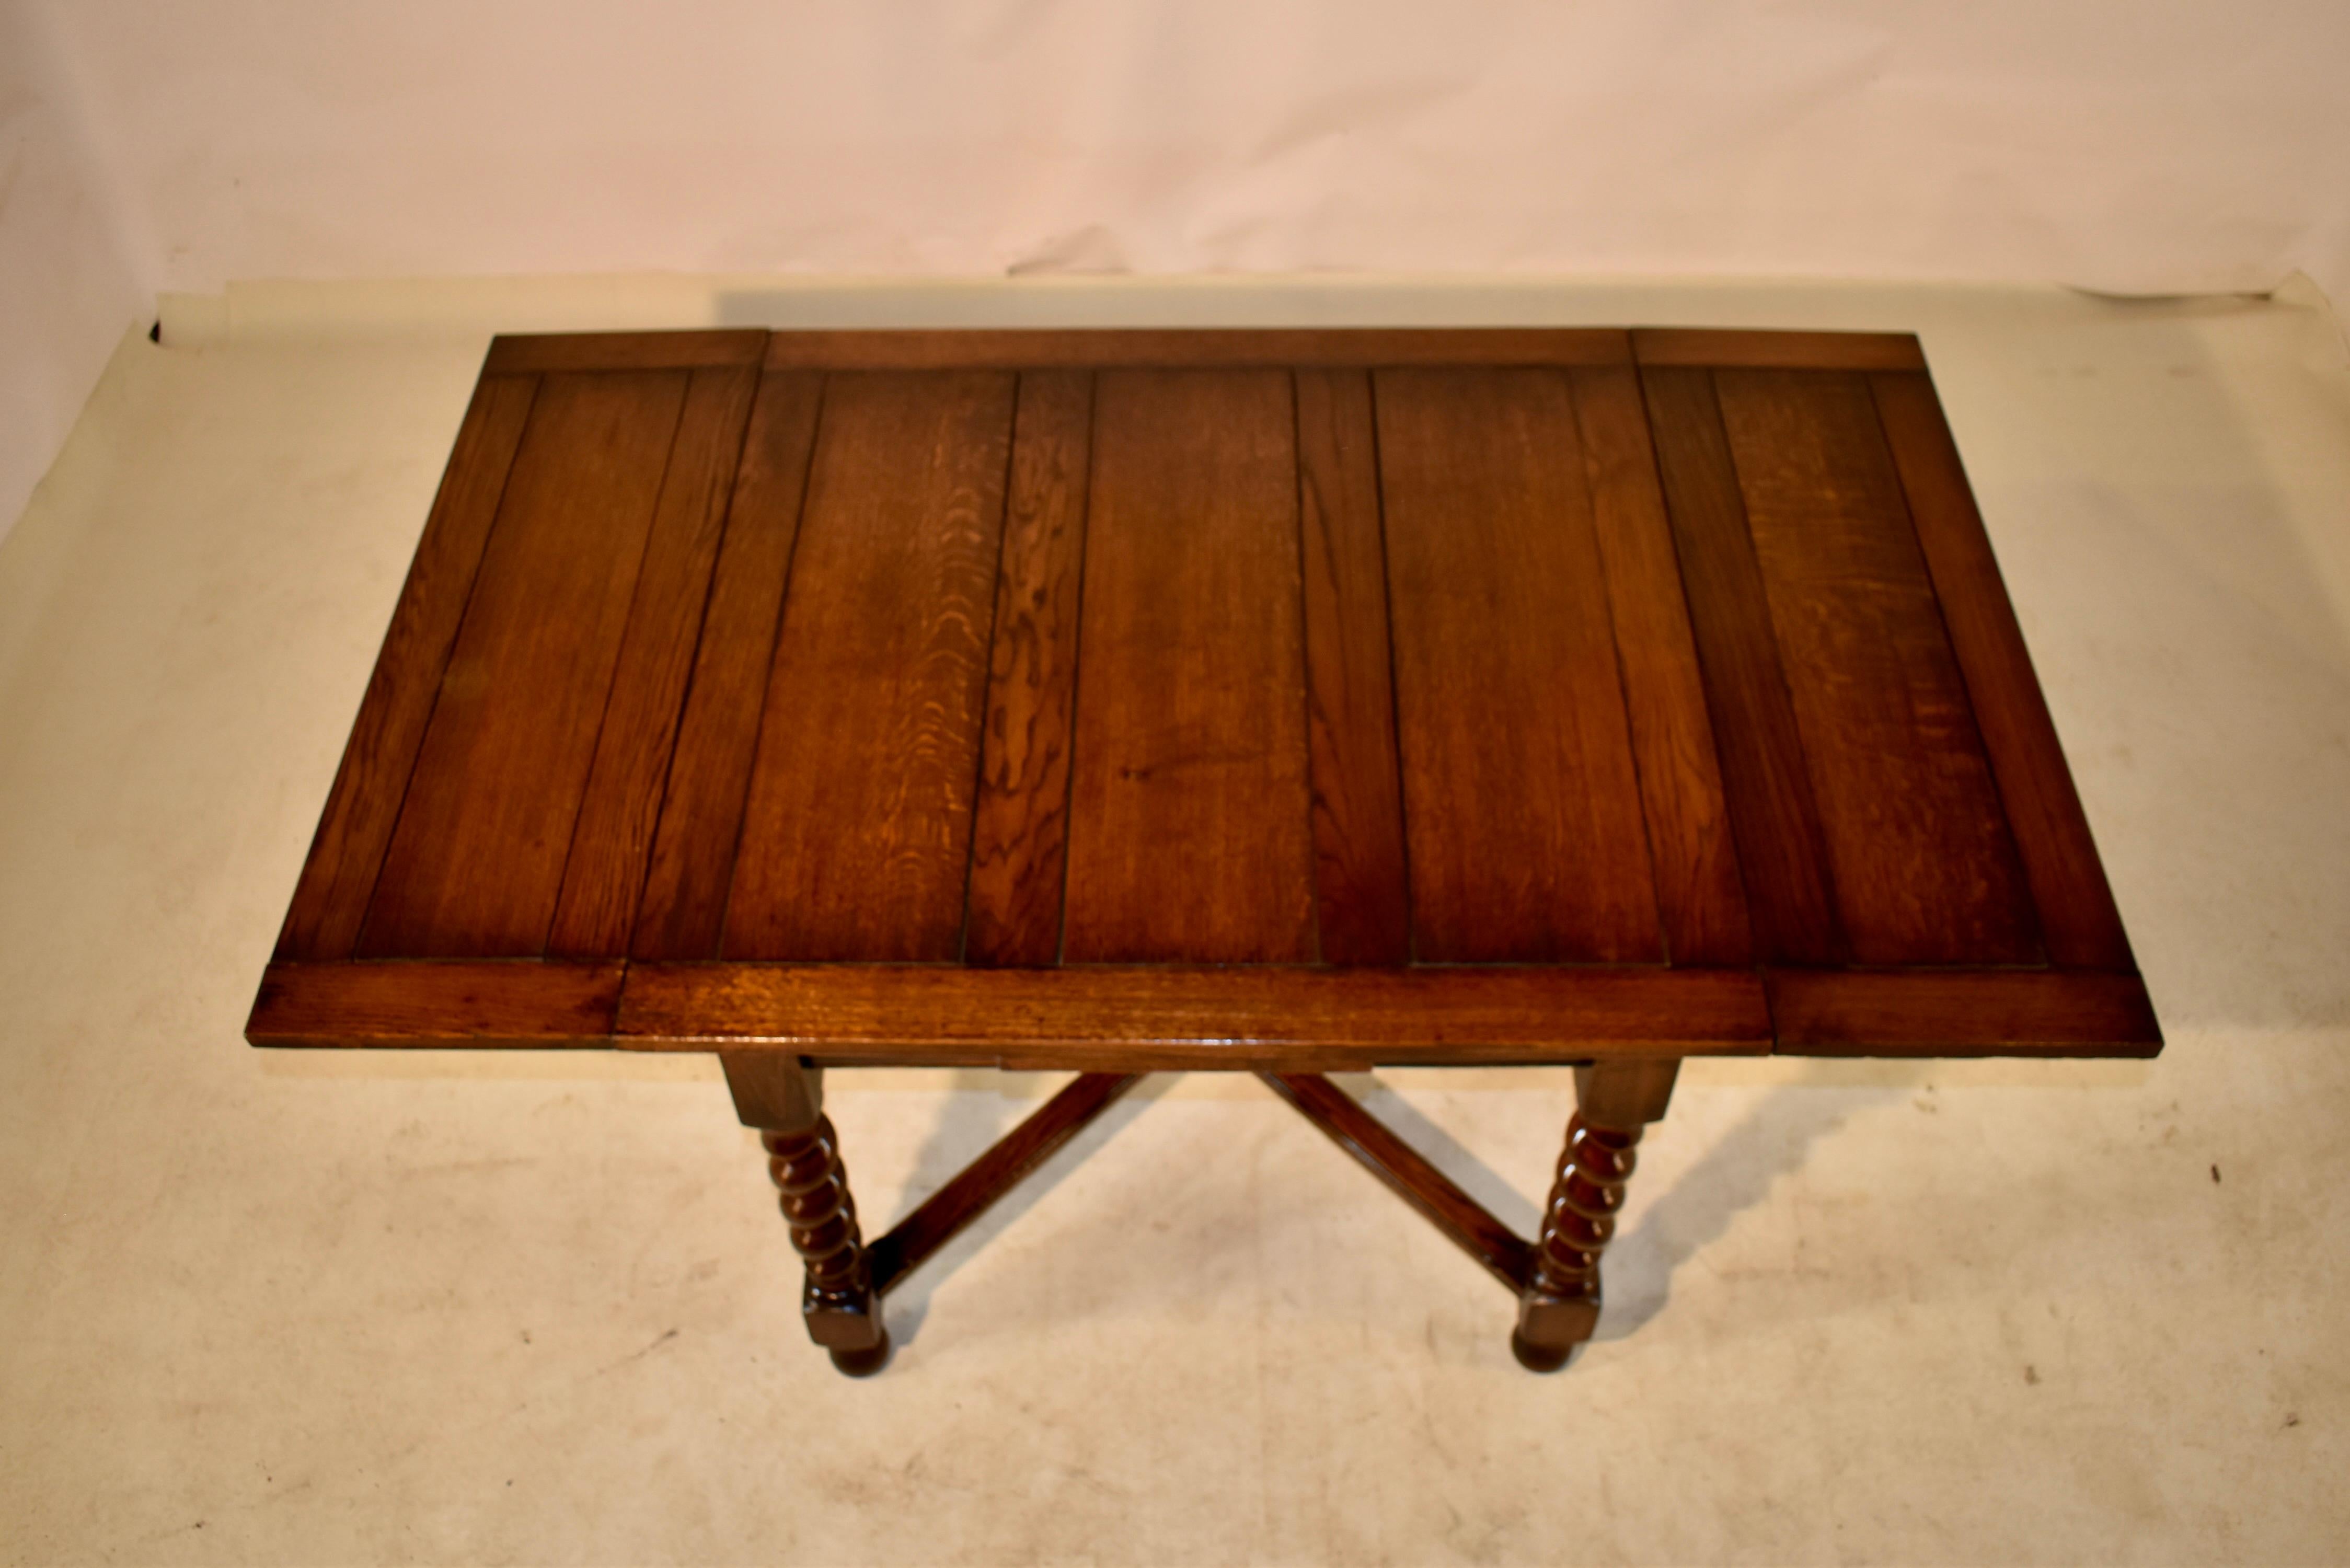 Early 20th Century English Oak Draw Leaf Table, c. 1900 For Sale